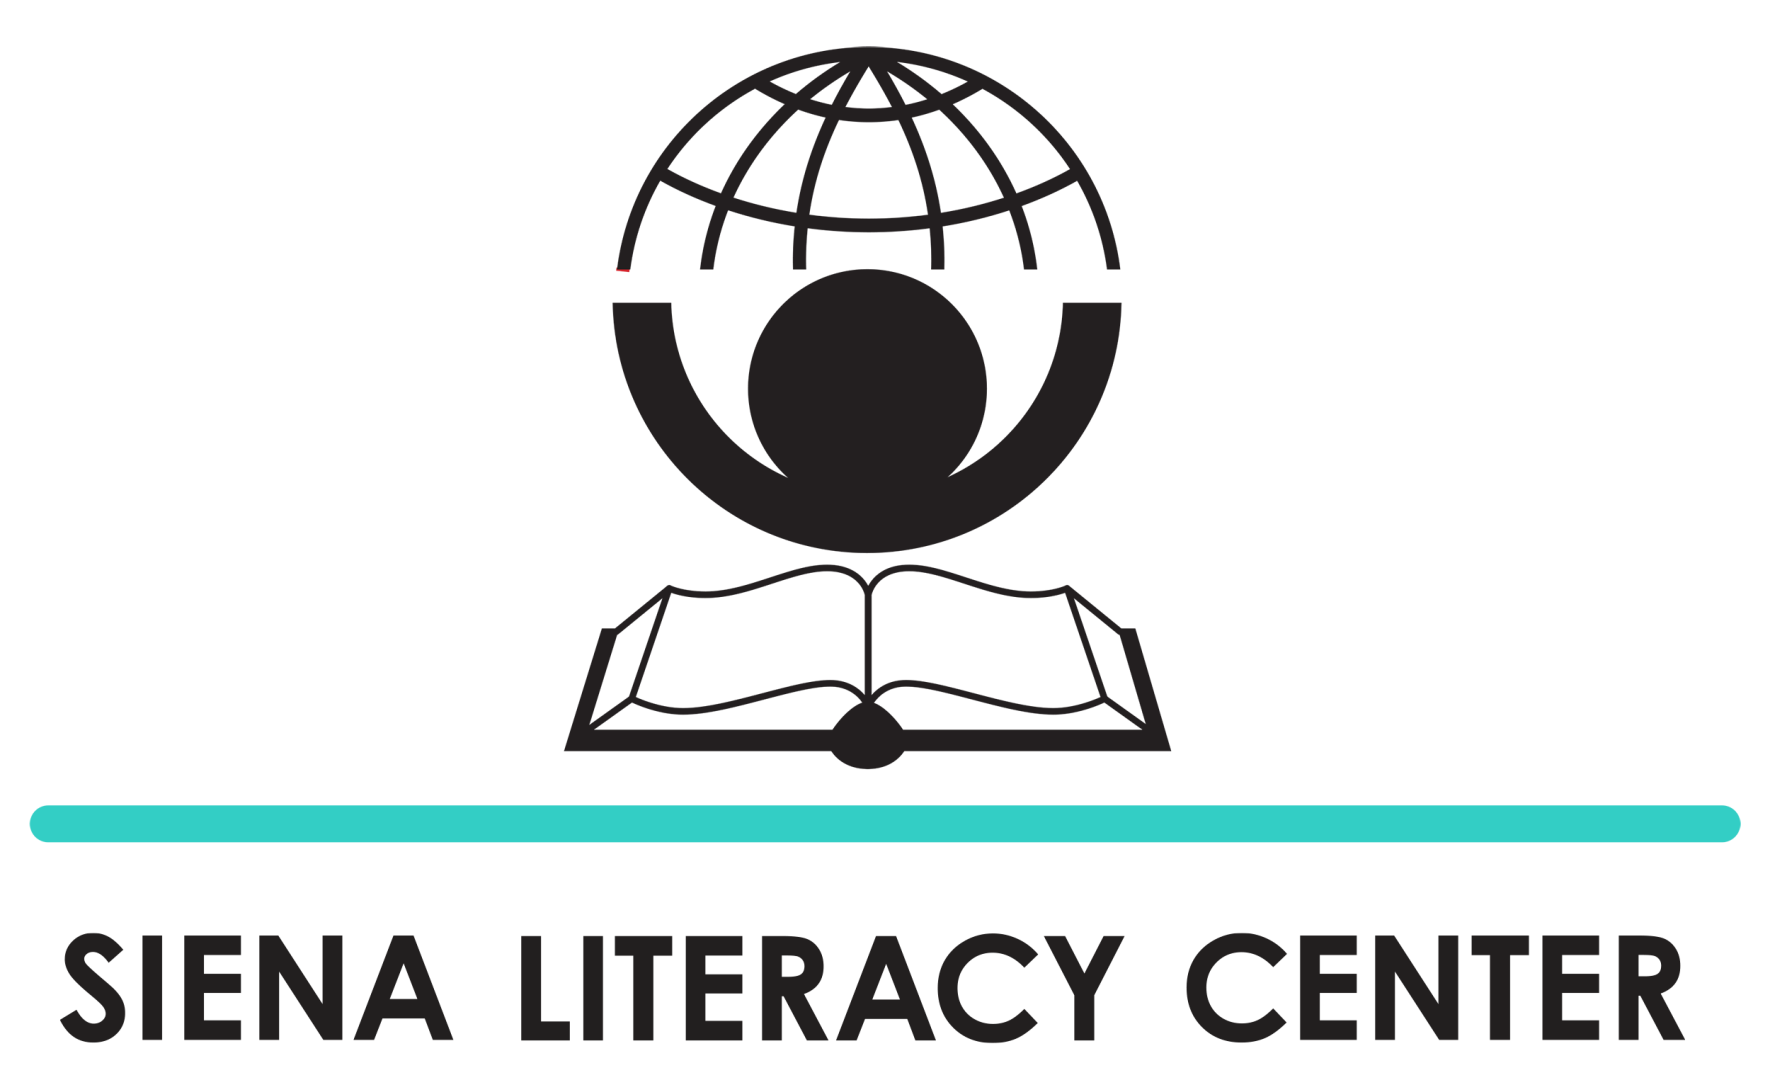 Siena Literacy Center logo with global hug and open book